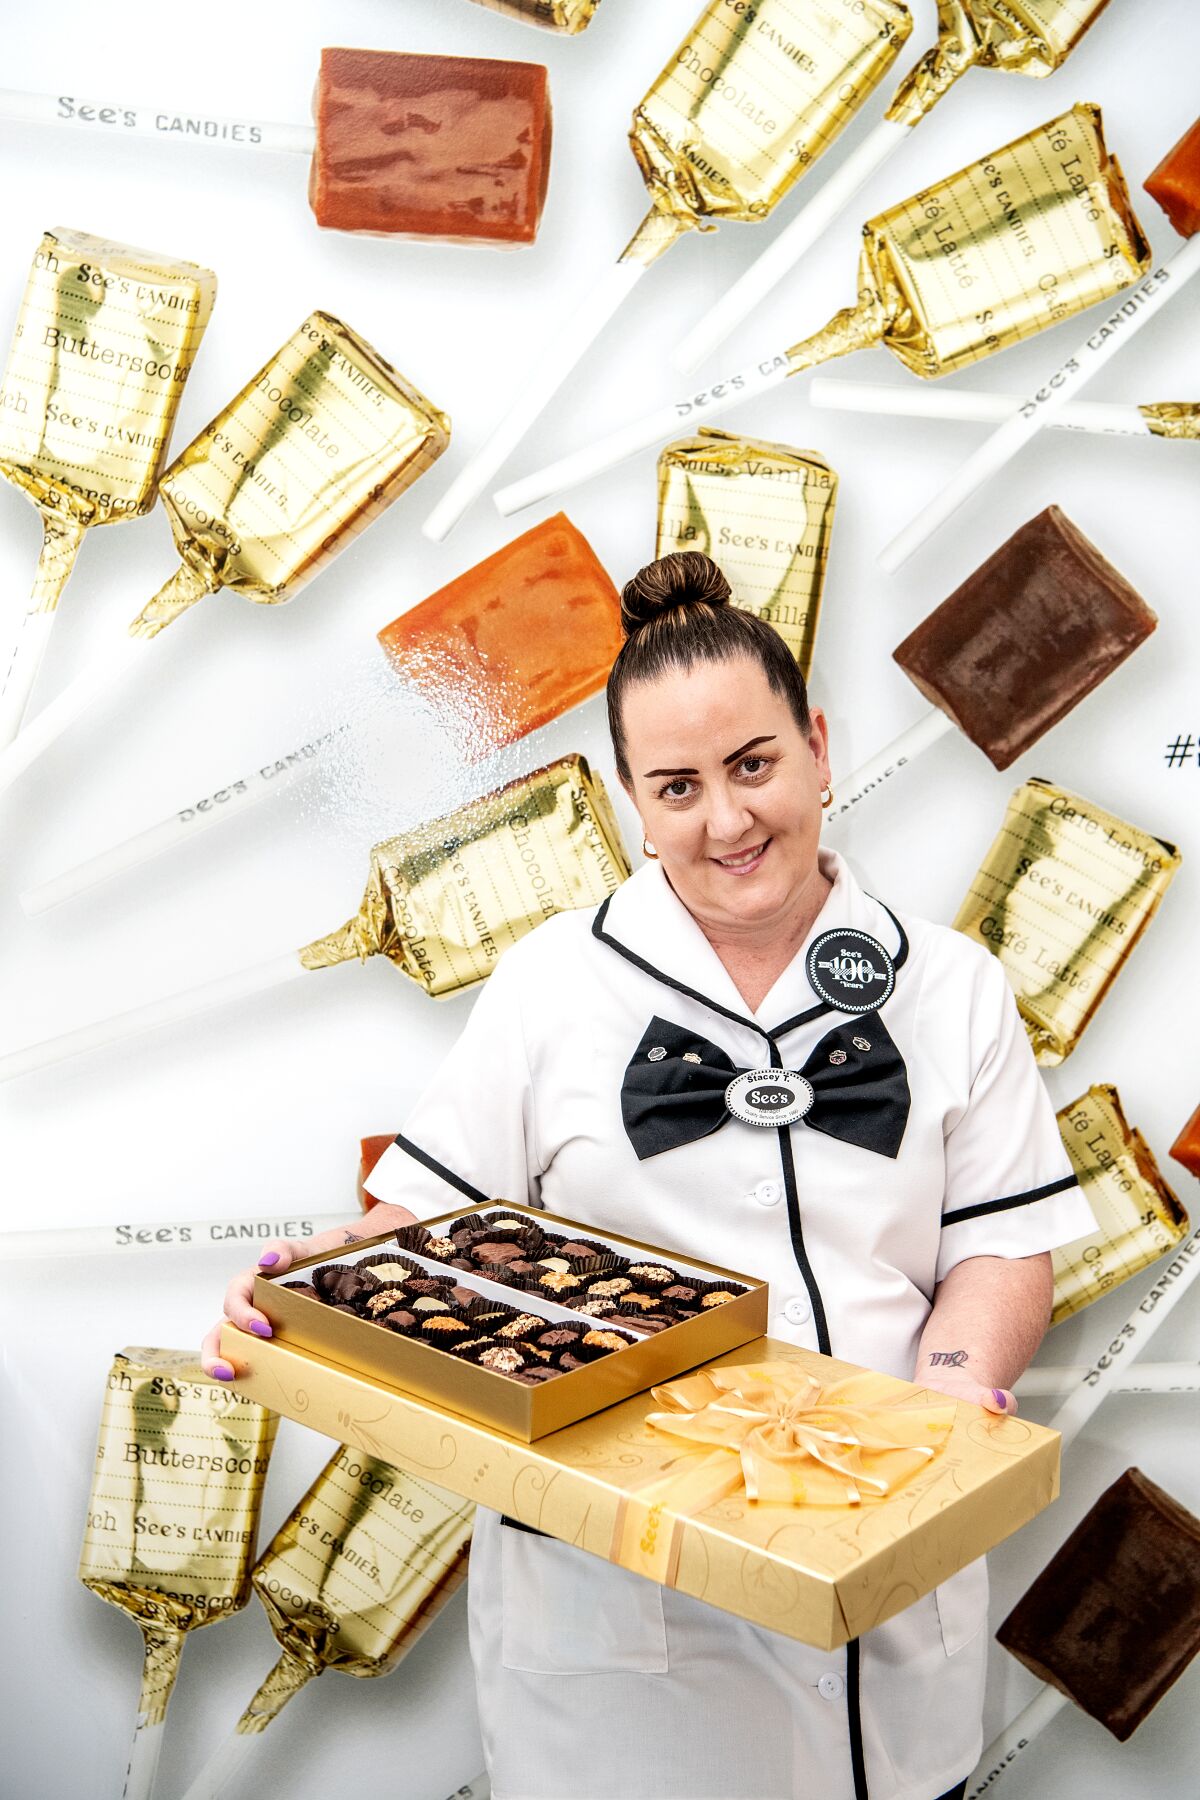 A woman in a white uniform with a black tie holds boxes of See's chocolates.